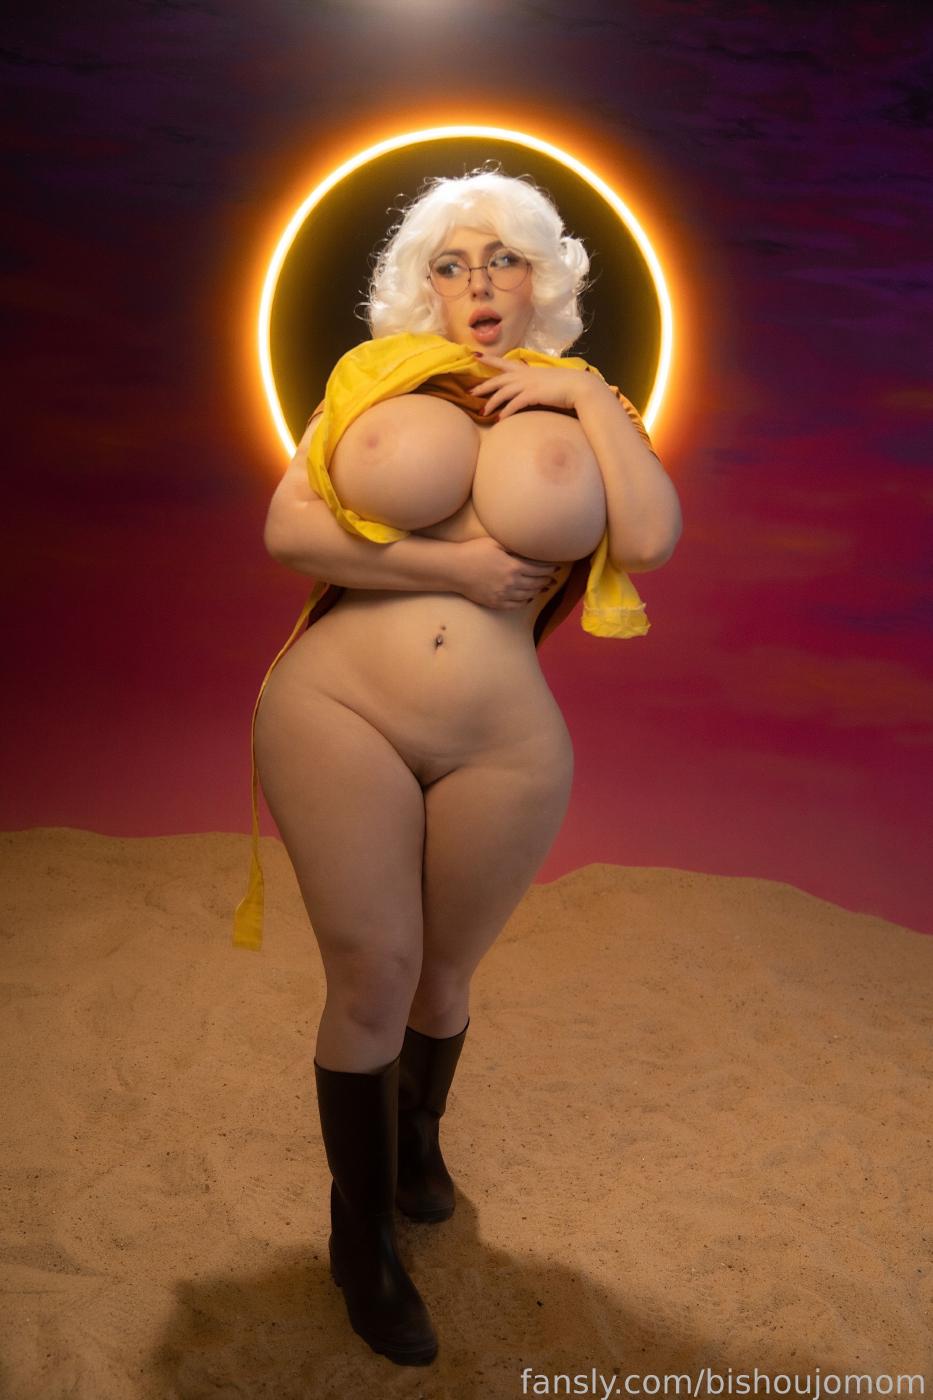 bishoujomom nude muriel bagge cosplay fansly set leaked AKQFWZ